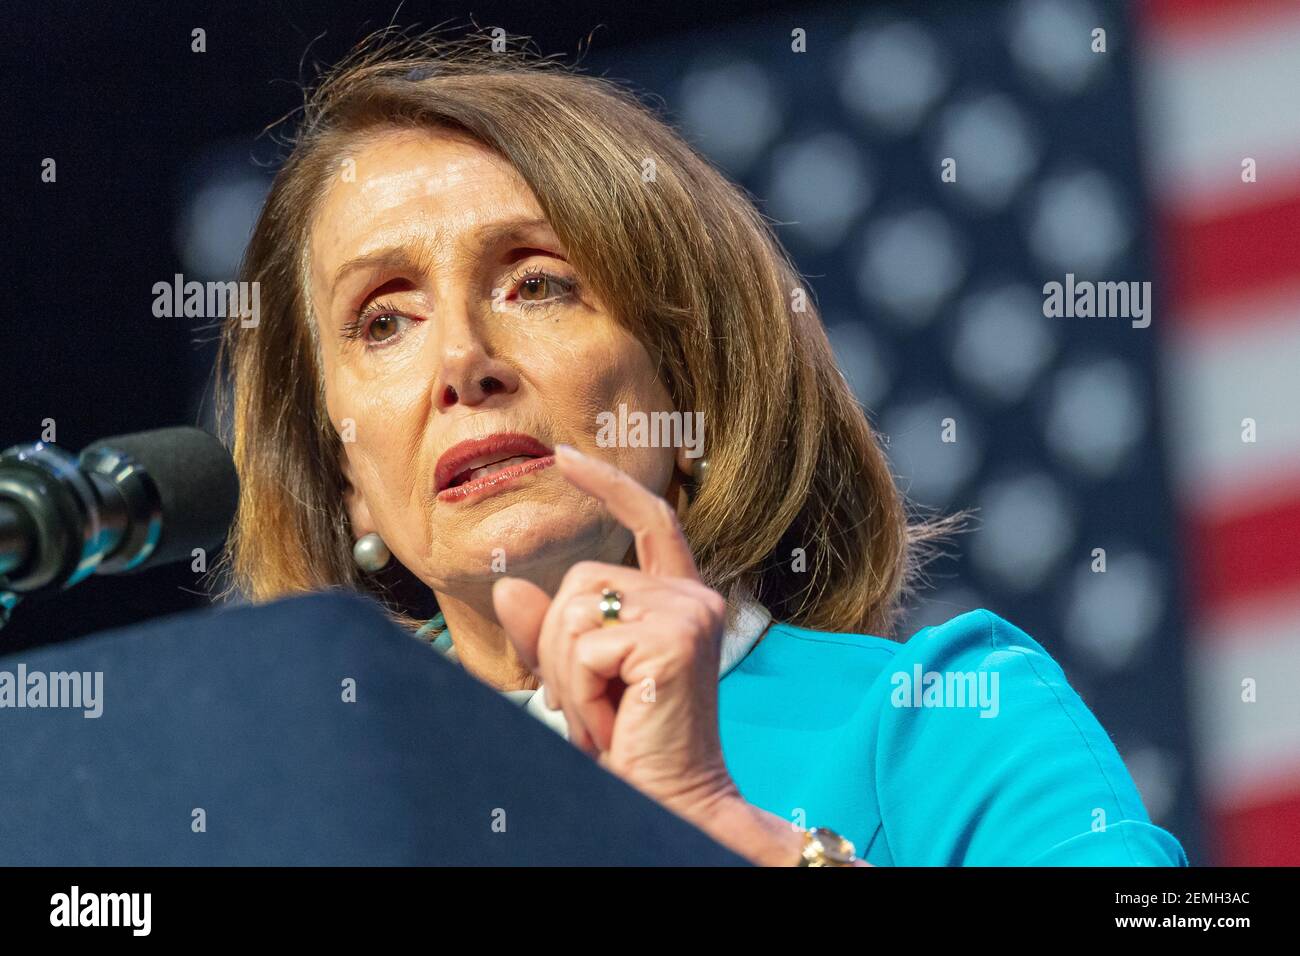 U.S. House Speaker Nancy Pelosi is seen offering remarks before the signing of the New York State "Red Flag" gun control bill at the Gerald W Lynch Theater at John Jay College of Criminal Justice in New York, NY, USA on February 25, 2019. (Photo by Albin Lohr-Jones/Sipa USA) Stock Photo